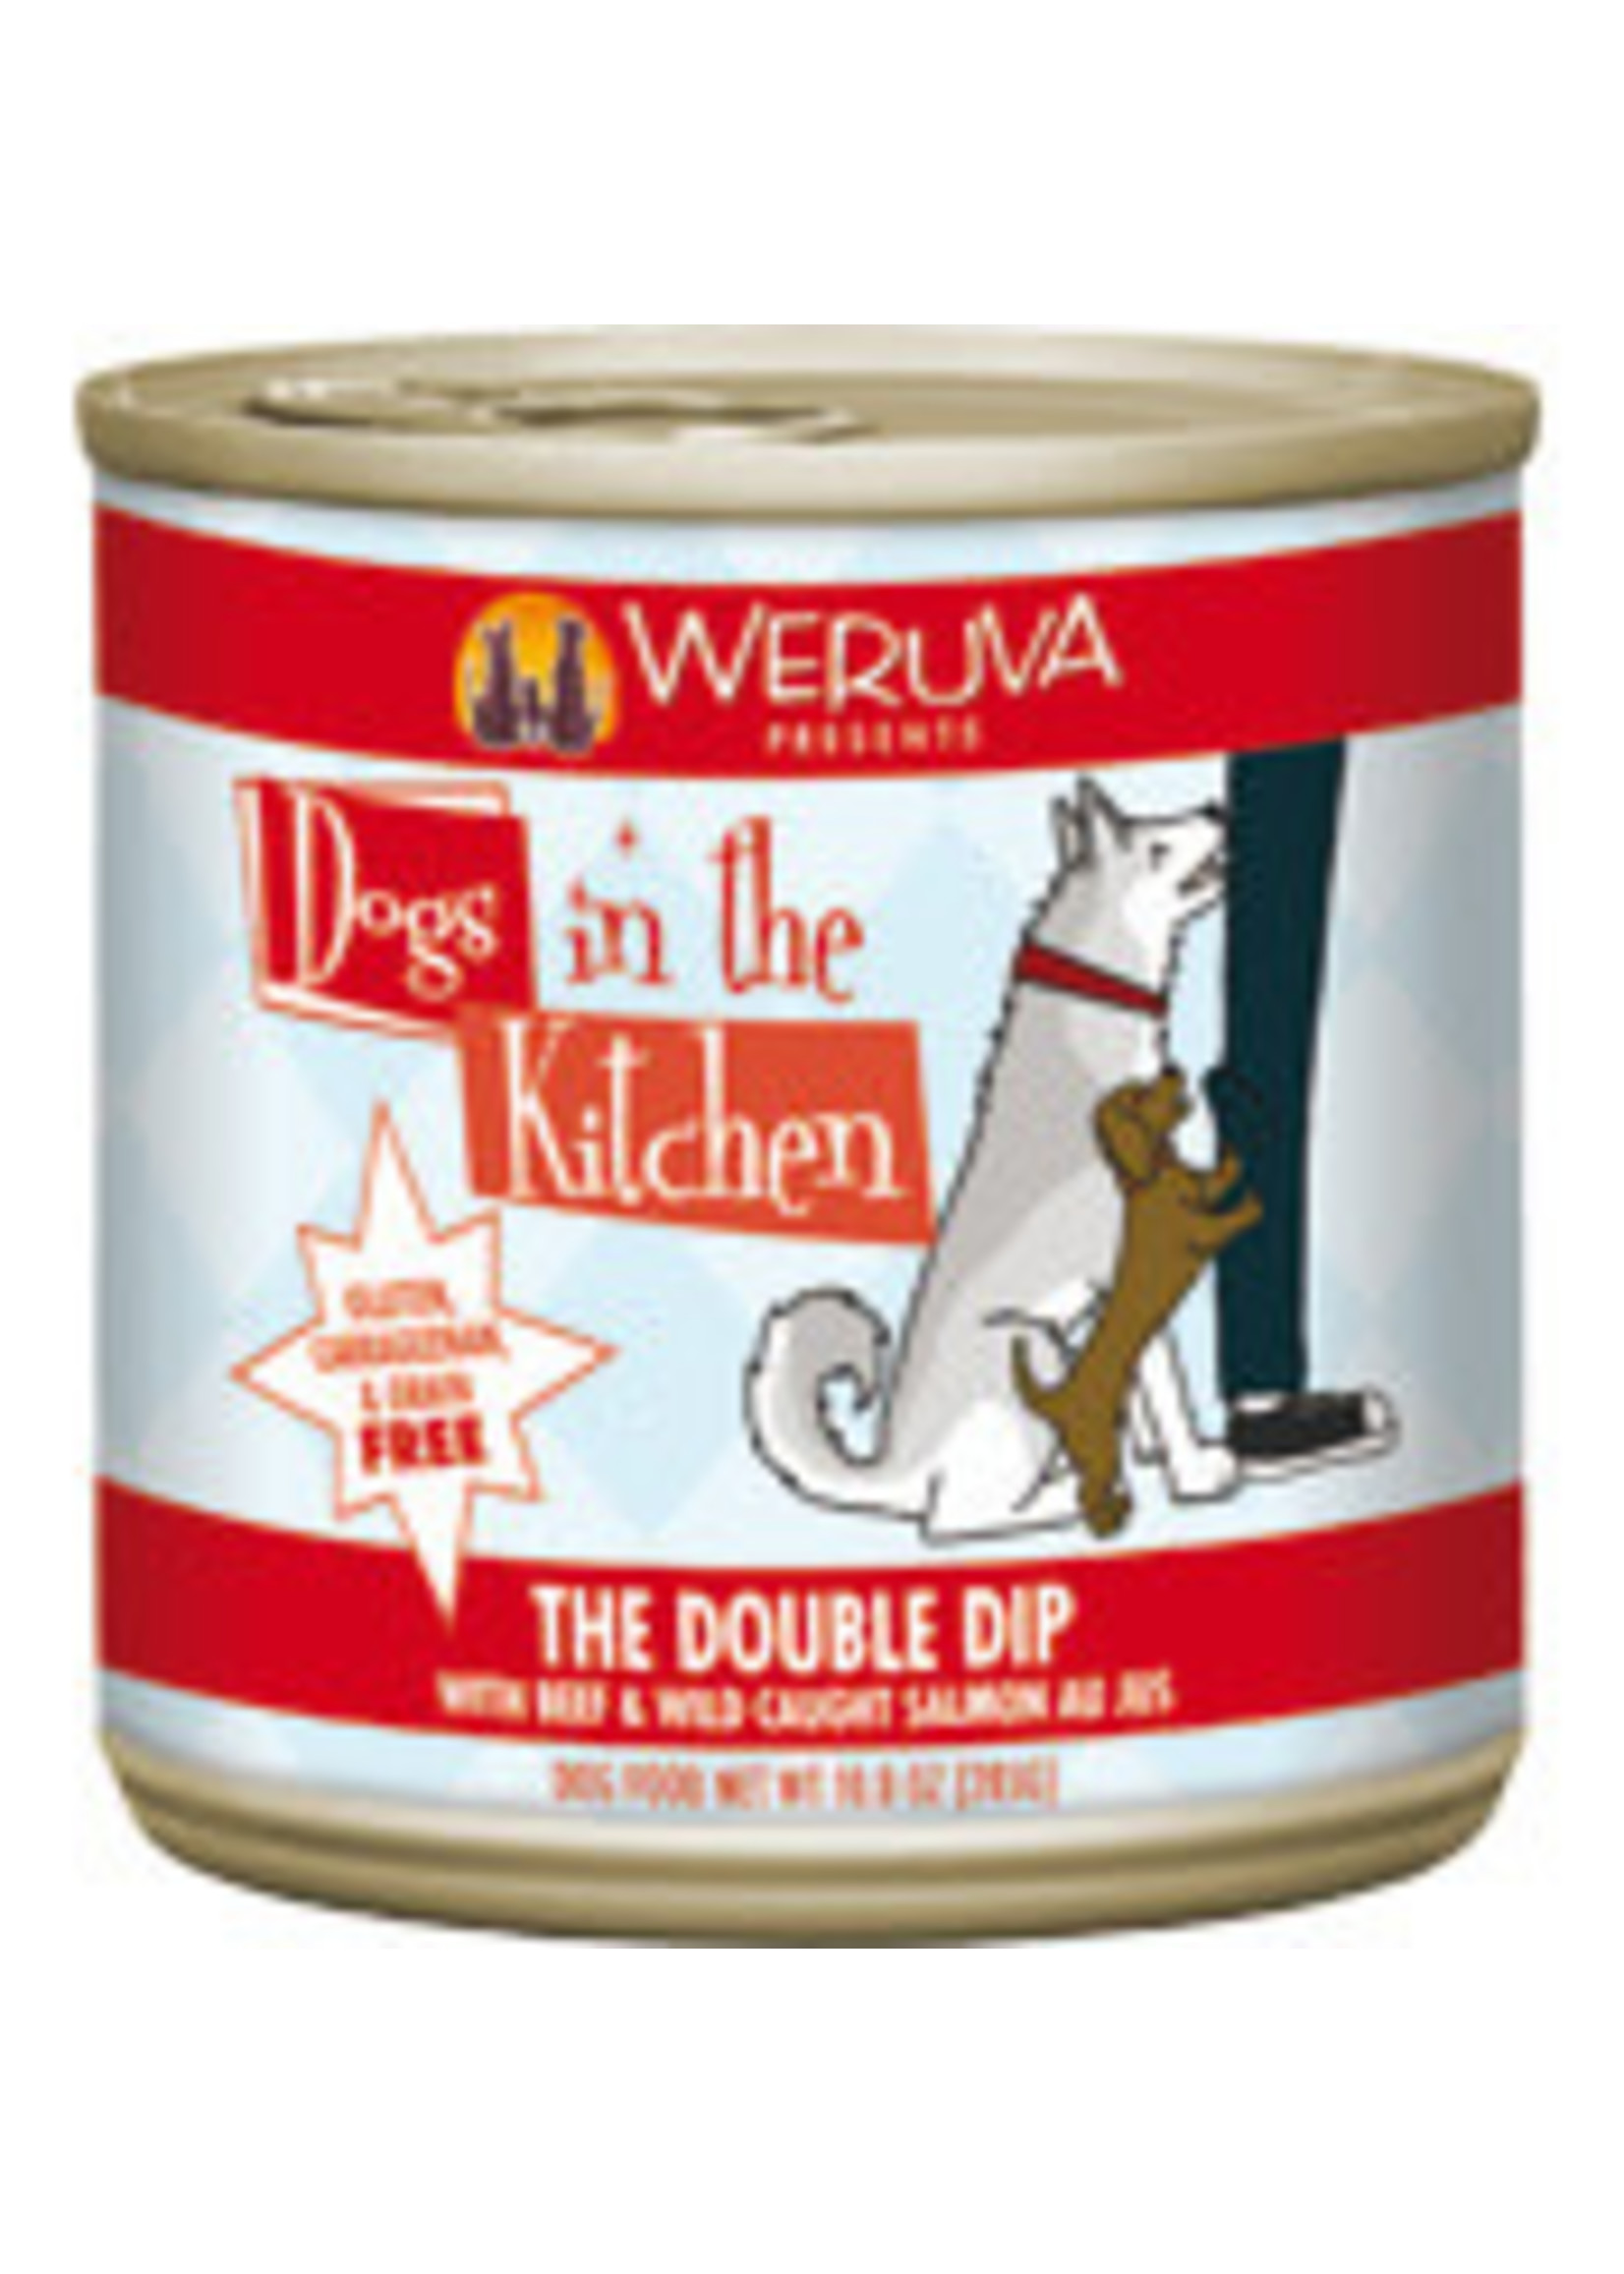 Weruva Weruva Dogs in the Kitchen - The Double Dip 10oz Can Dog Food